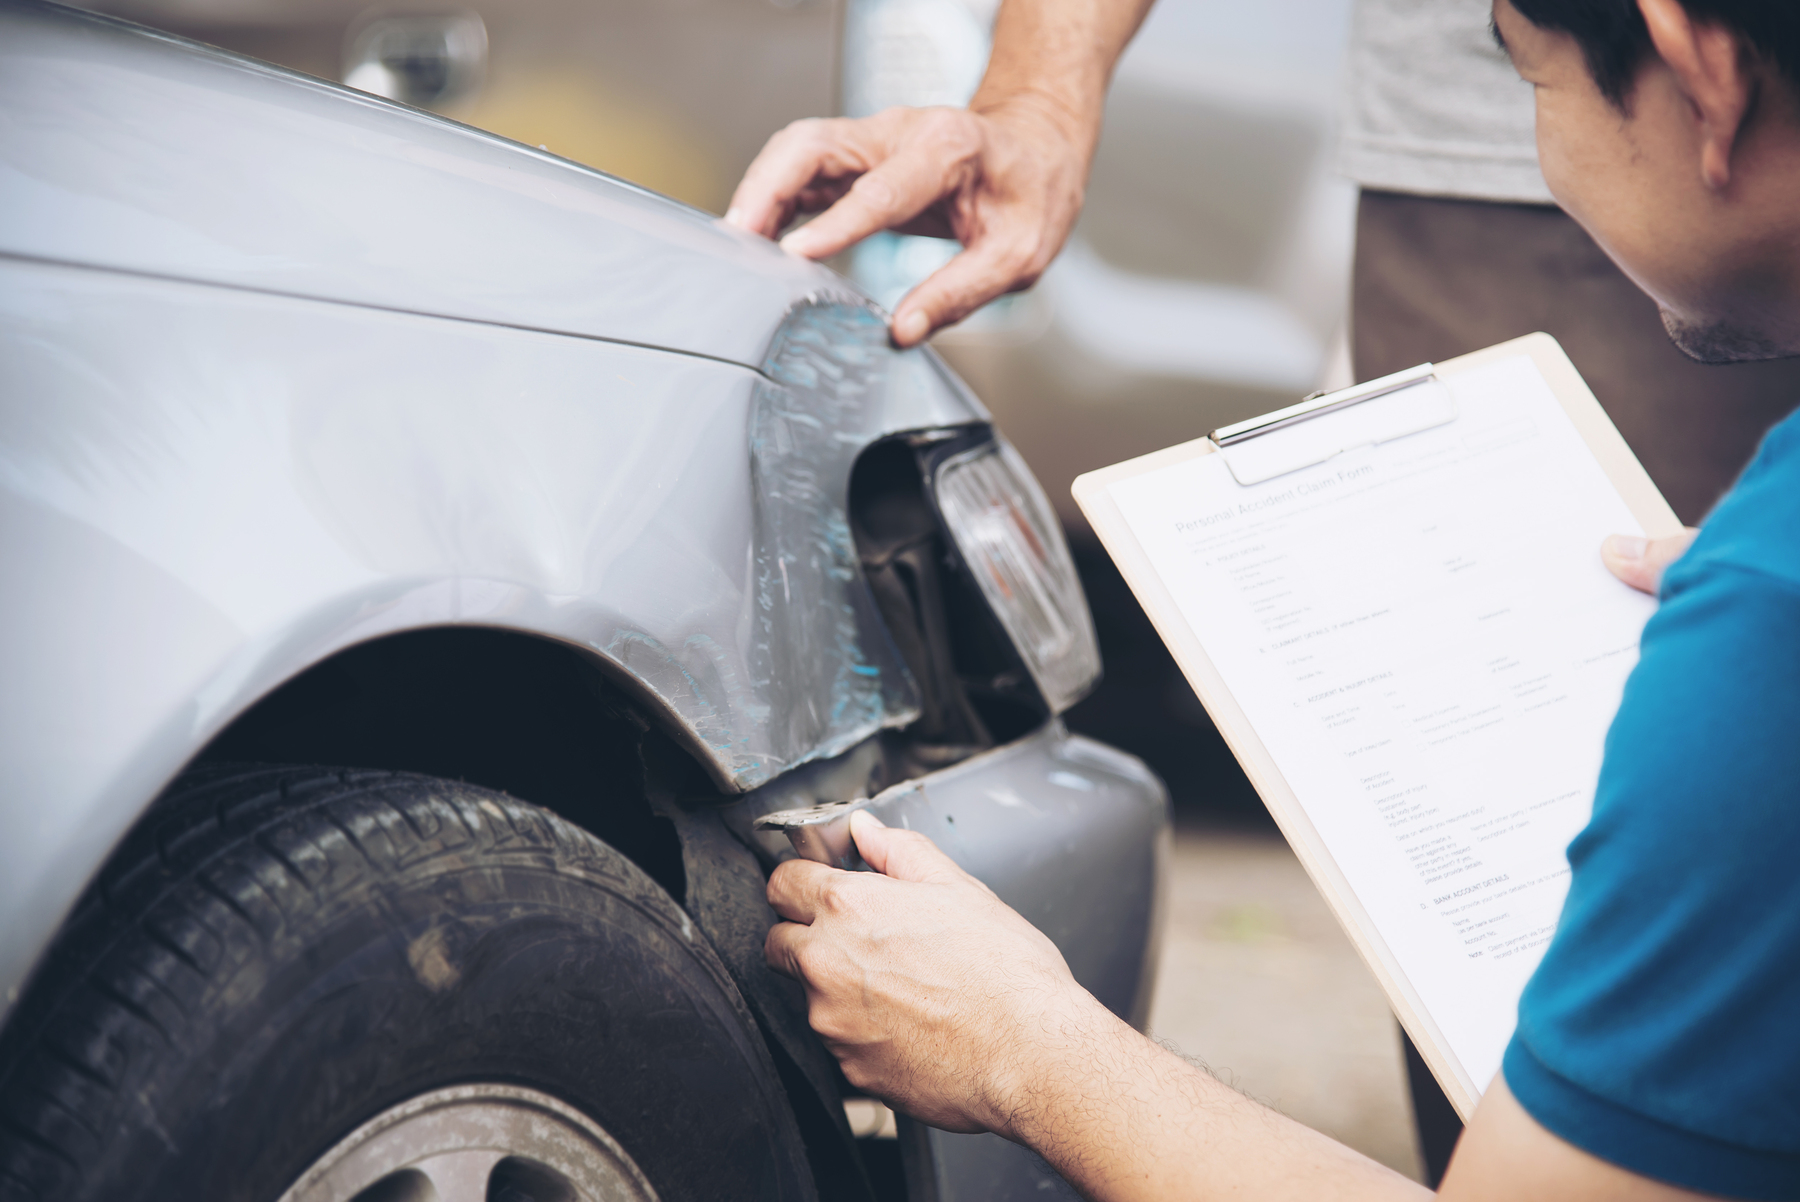 Professional inspecting and evaluating a car scratch for precise automotive repair